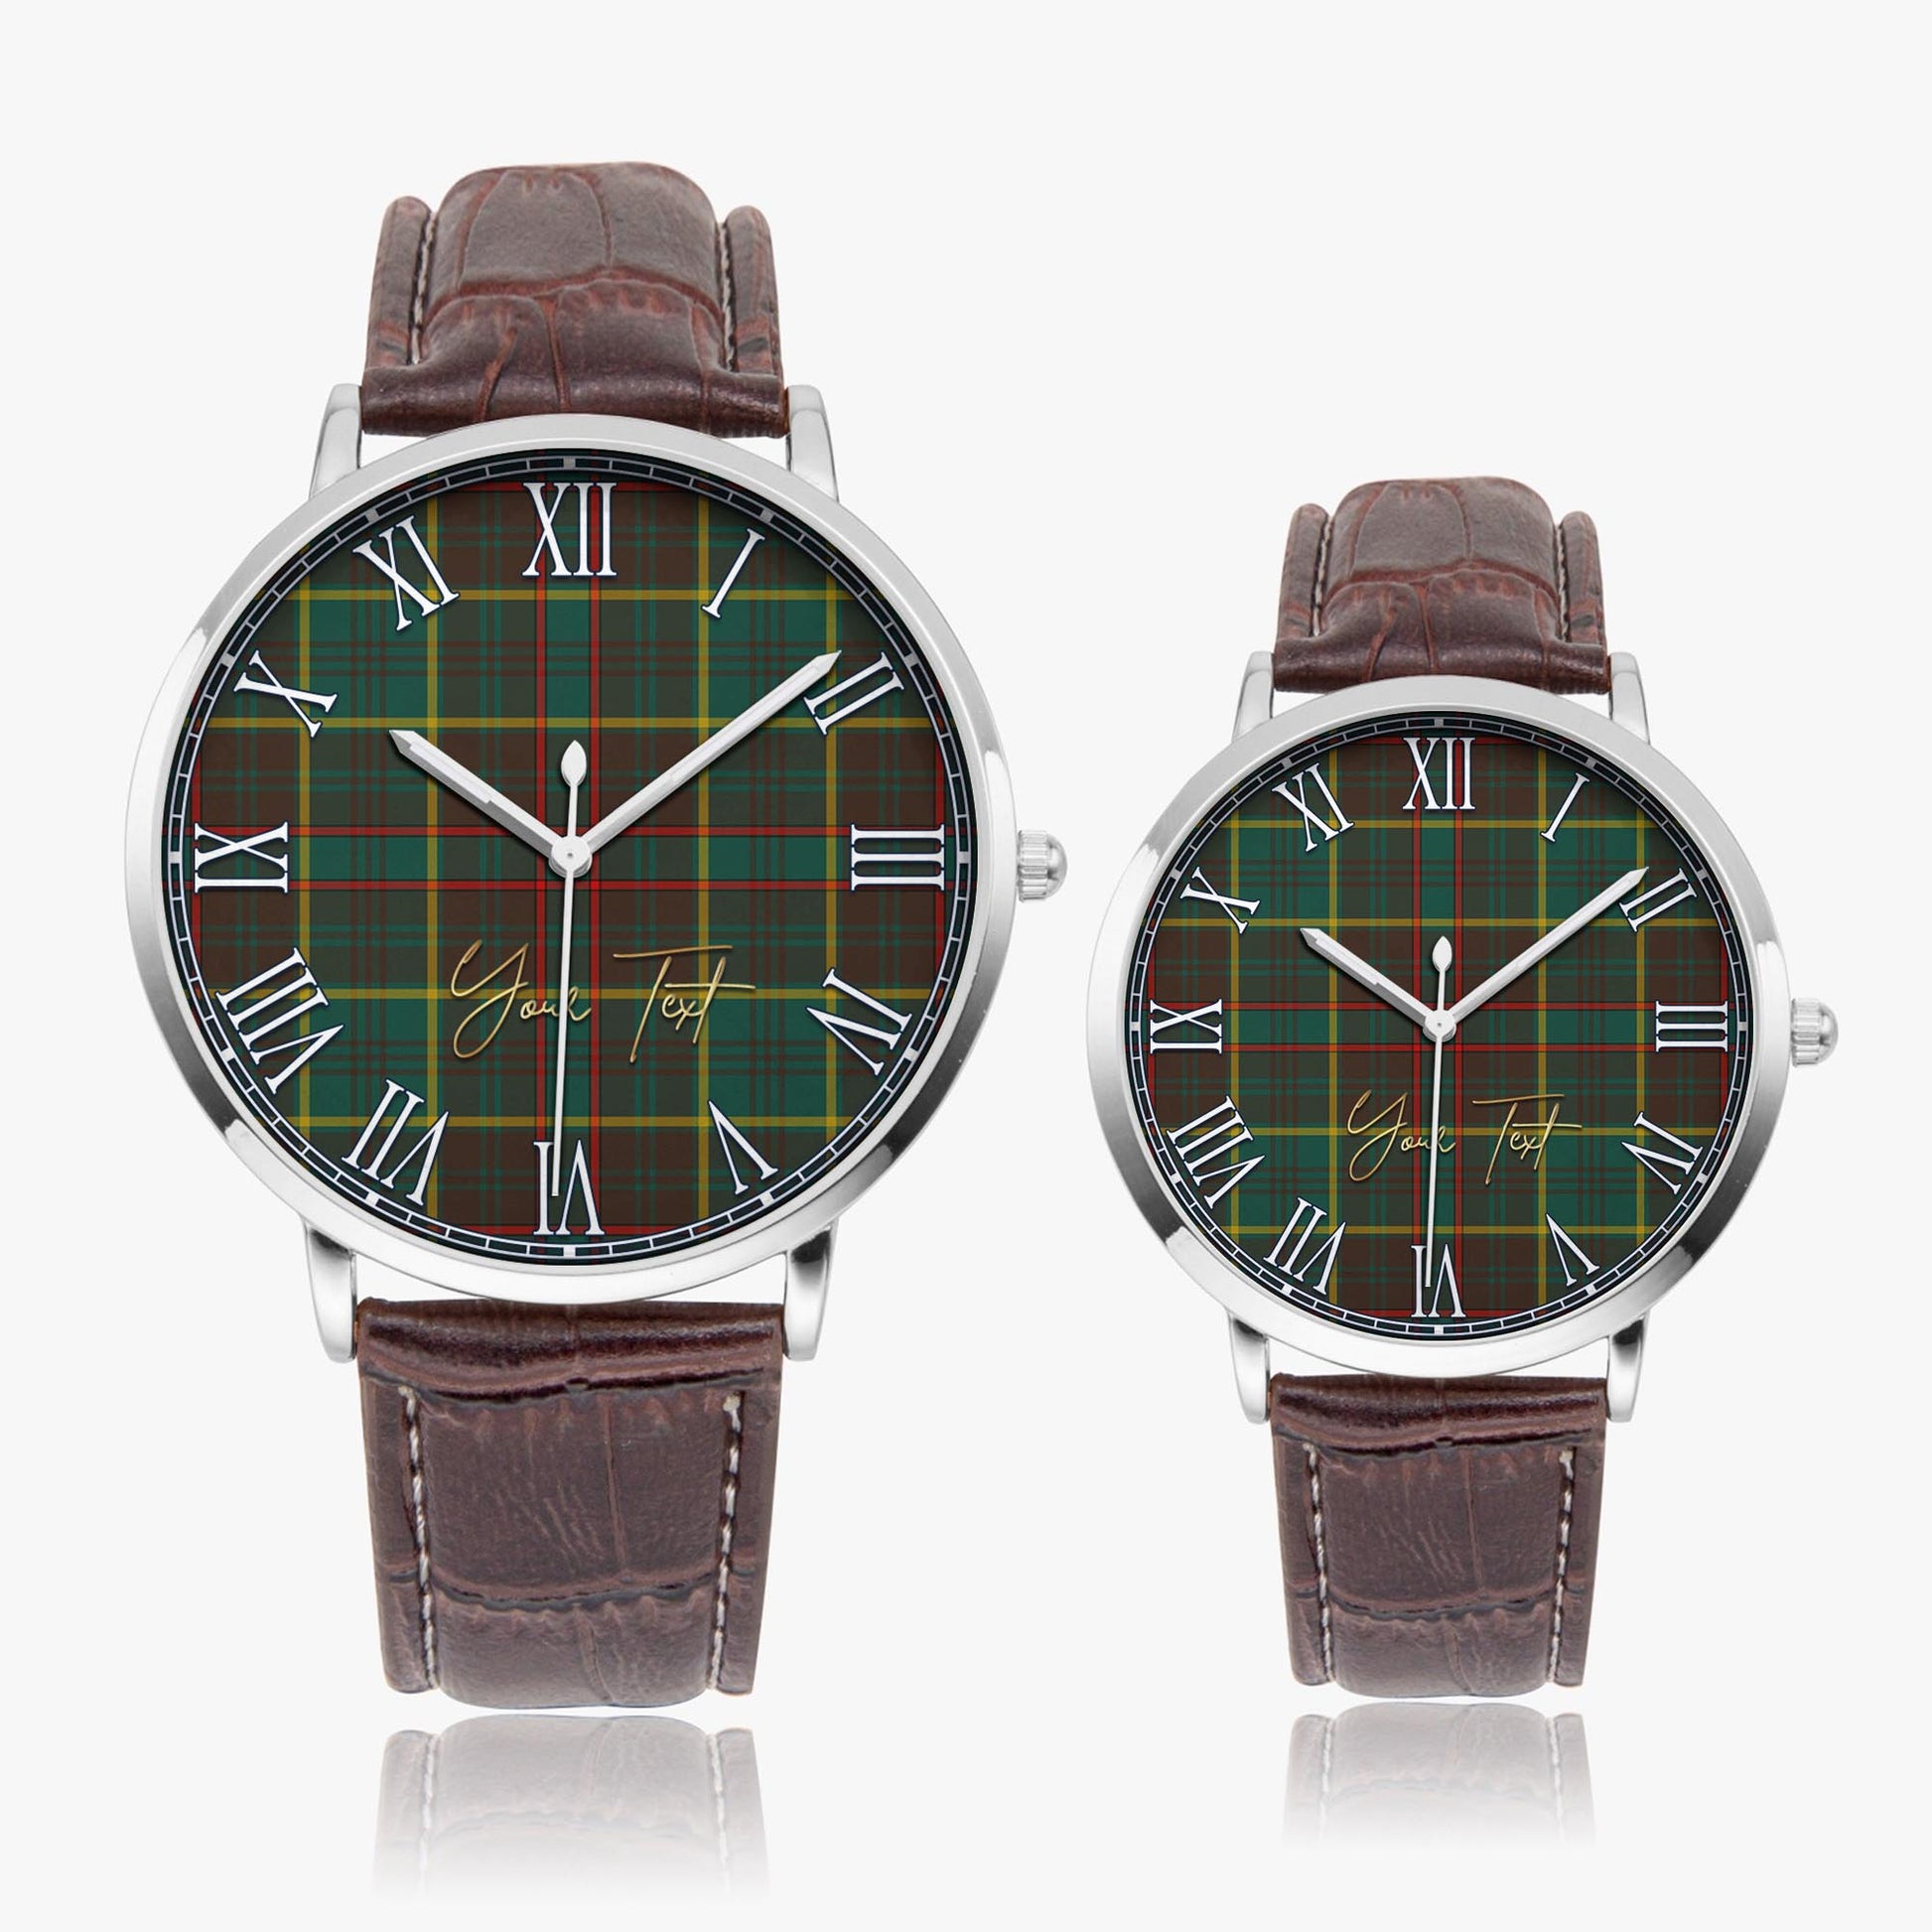 Ontario Province Canada Tartan Personalized Your Text Leather Trap Quartz Watch Ultra Thin Silver Case With Brown Leather Strap - Tartanvibesclothing